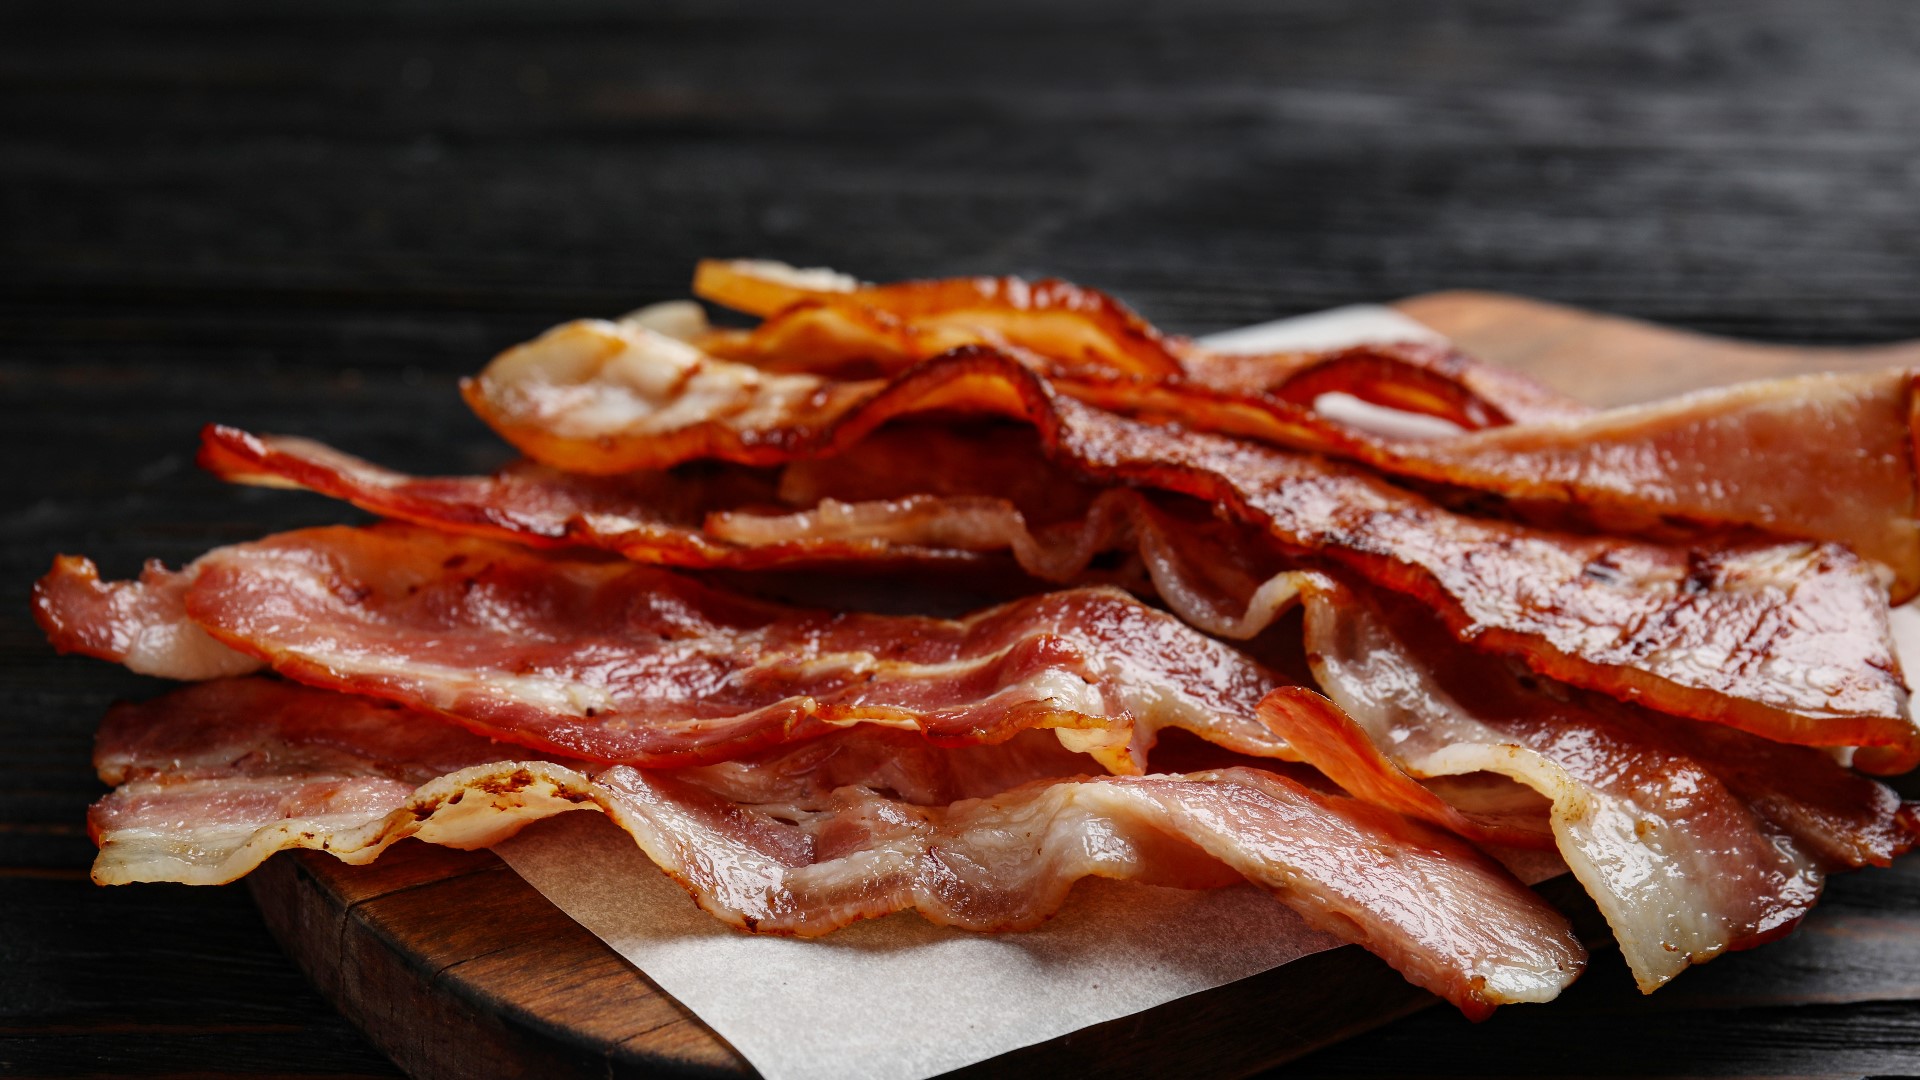 Rita Manuel from Snooze AM Eatery discusses some of the items they will offer to celebrate National Bacon Day on Saturday, Sept. 3.